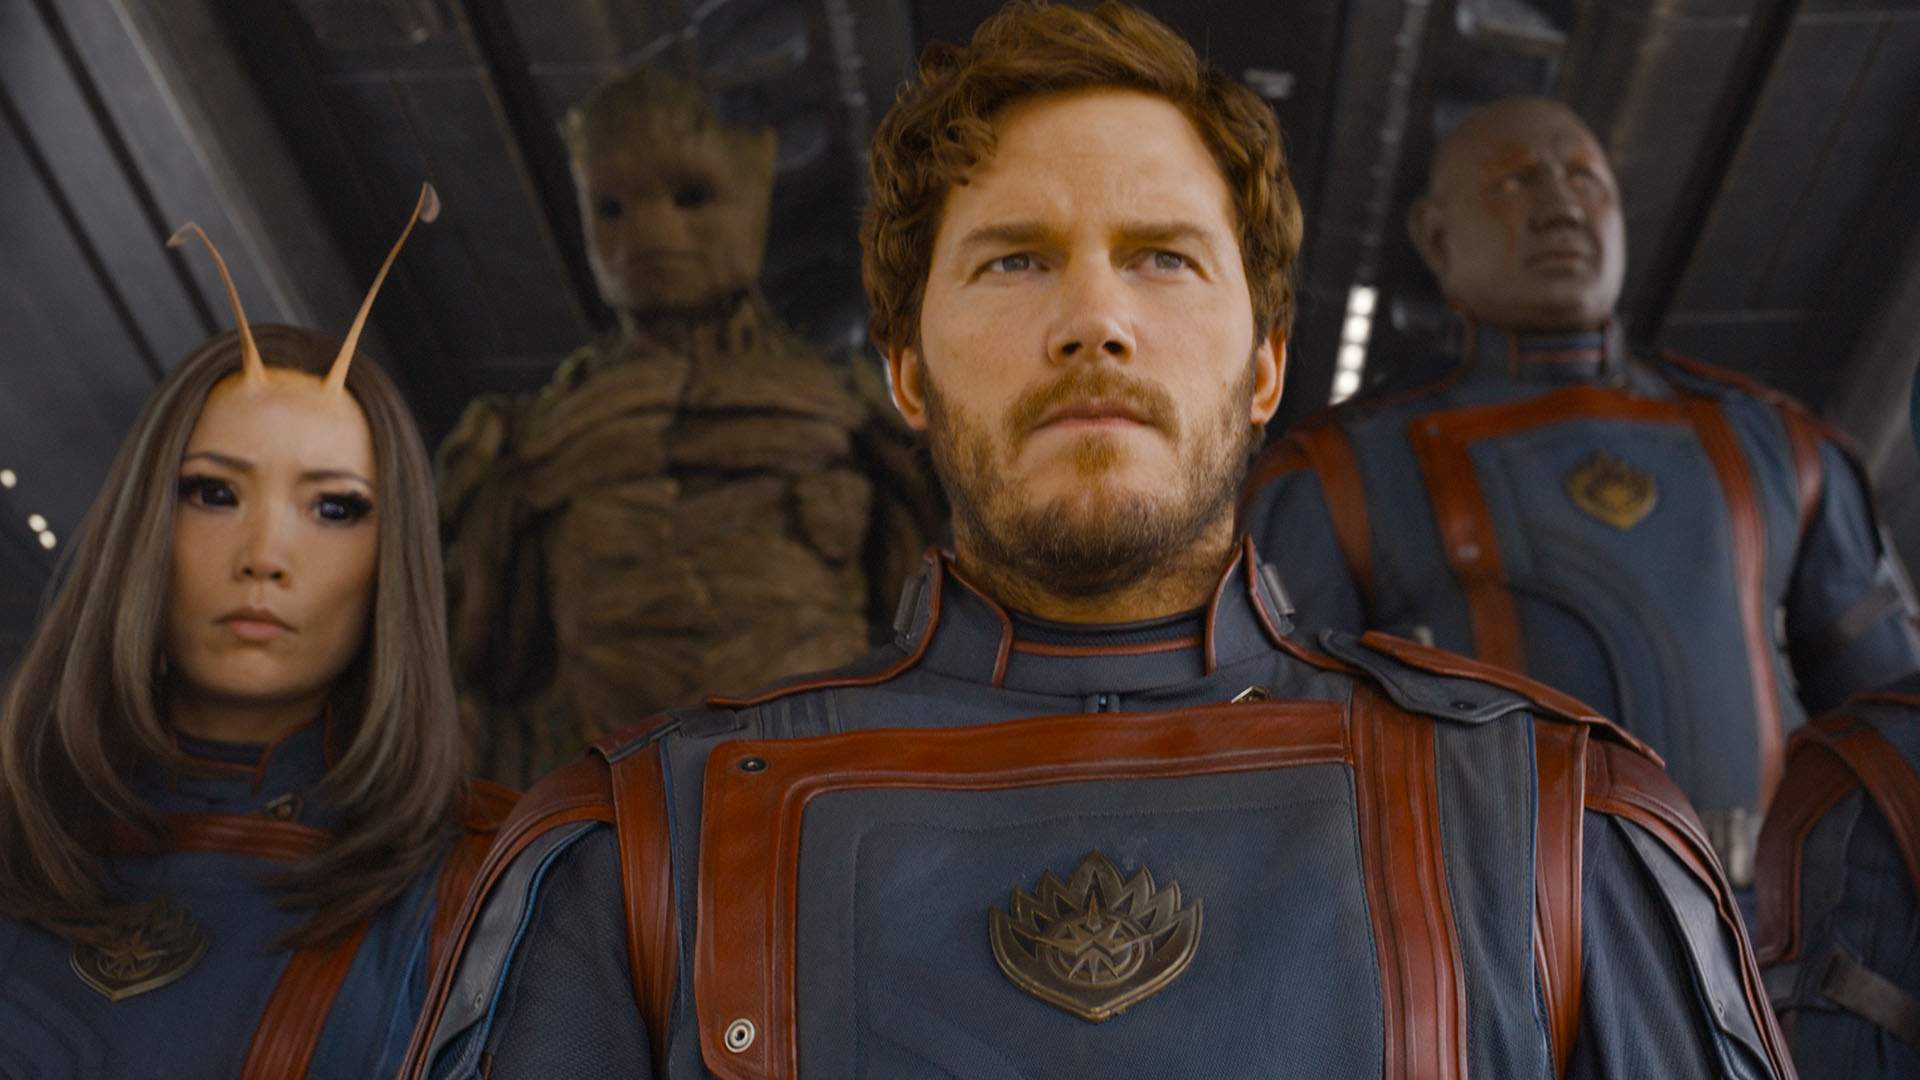 The Just-Dropped New 'Guardians of the Galaxy Vol. 3' Trailer Goes Heavy on Family and Last Rides